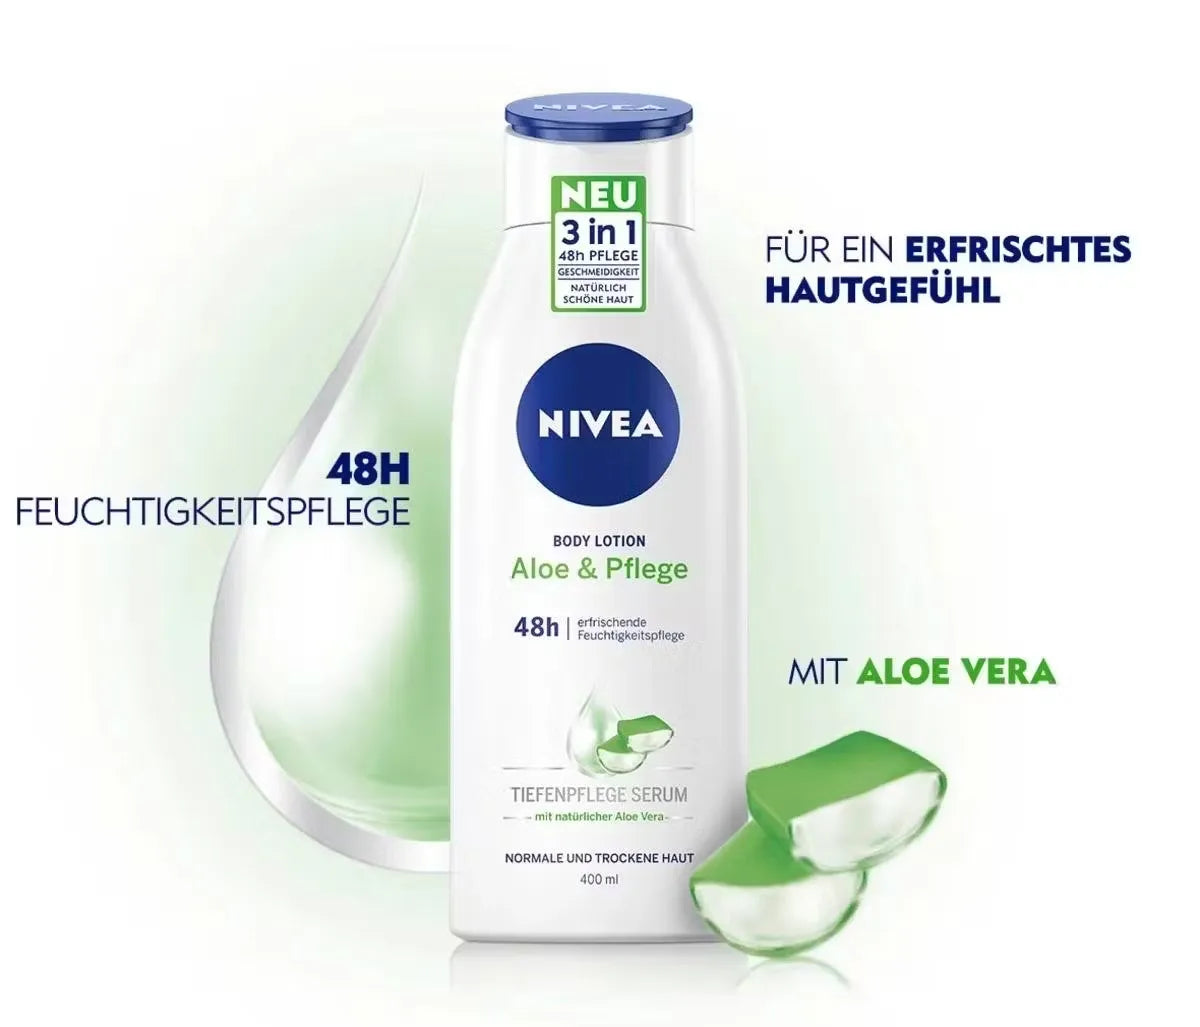 White pump bottle of Nivea Body Lotion - Aloe & Pflege (400ml) with green accents and aloe vera leaf image. Lotion being dispensed onto hand.